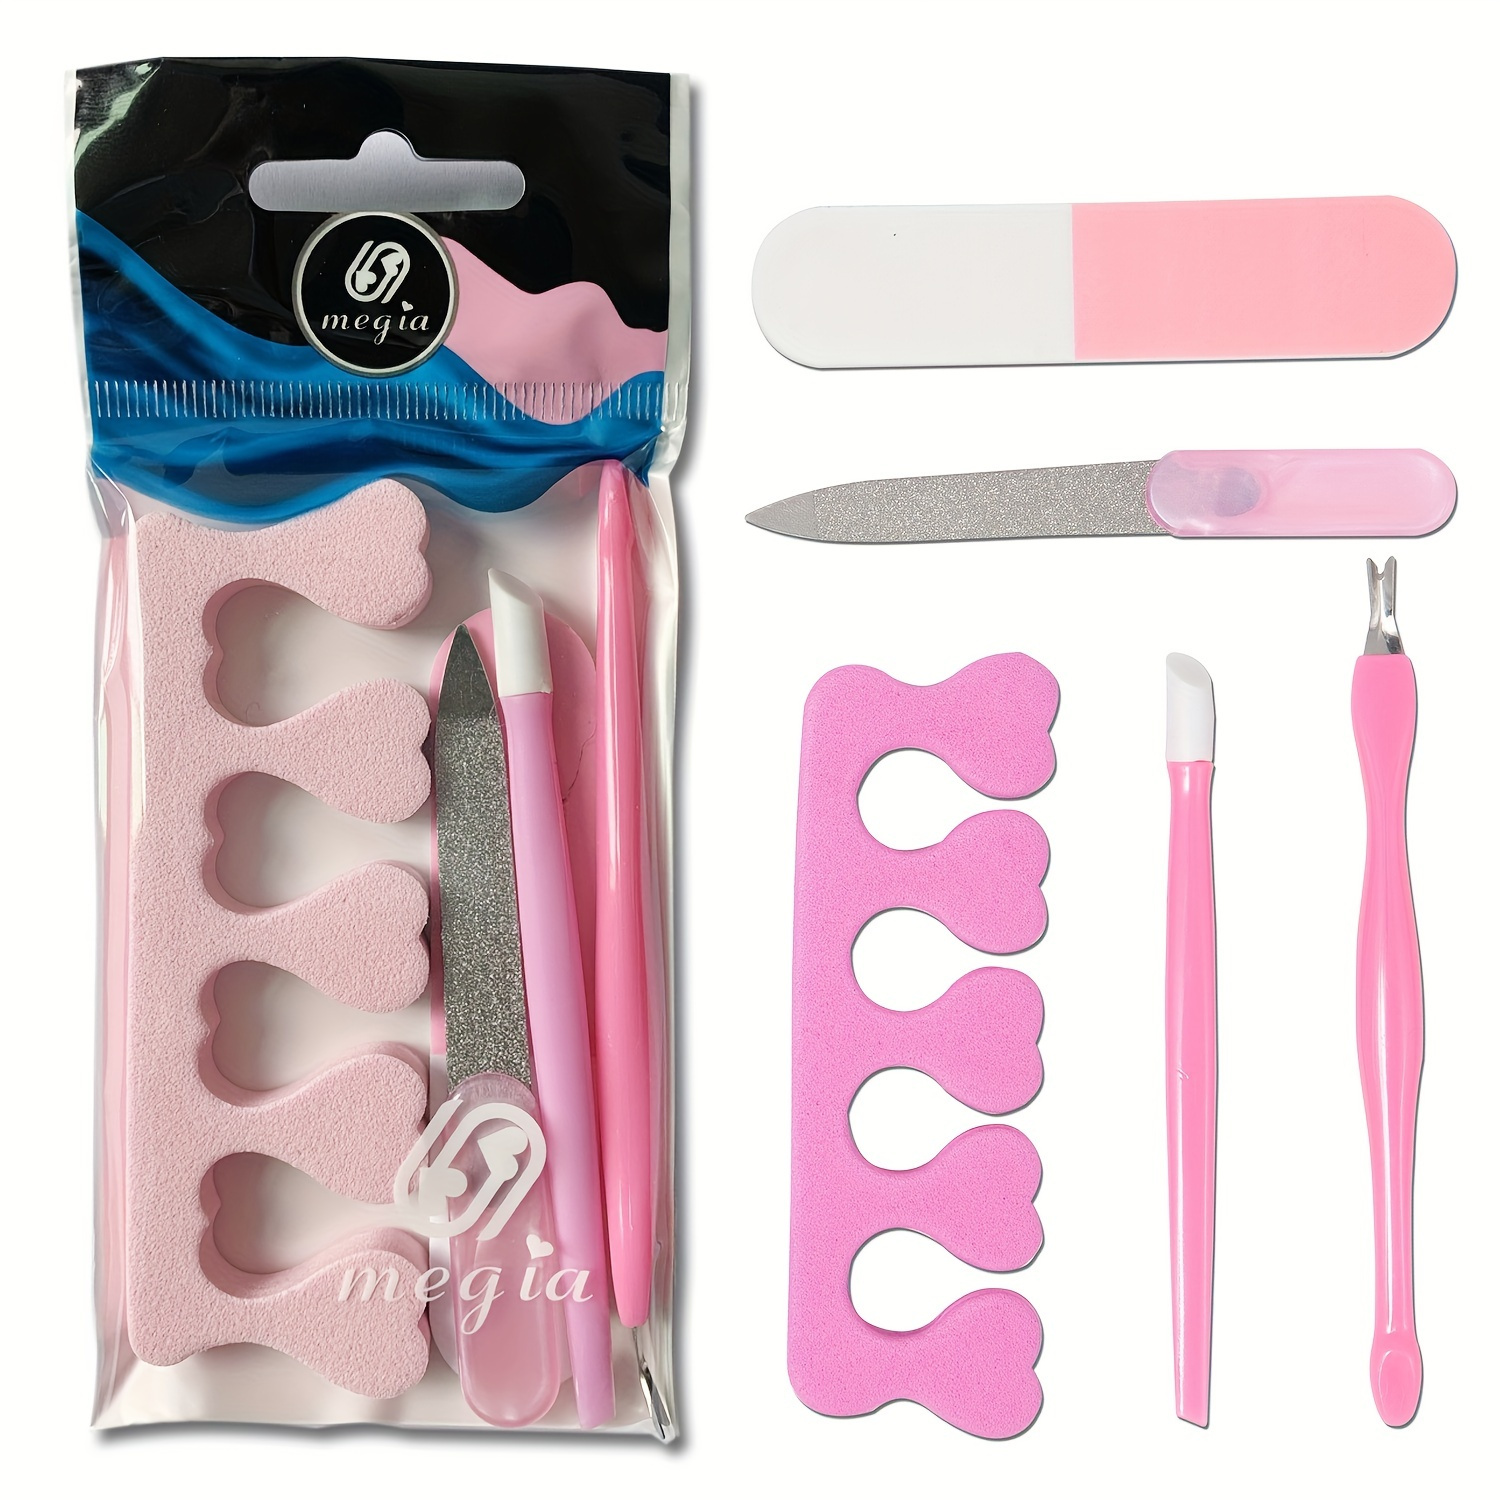 Lick 18 in 1 Stainless Steel Manicure Pedicure Kit | Sugatra